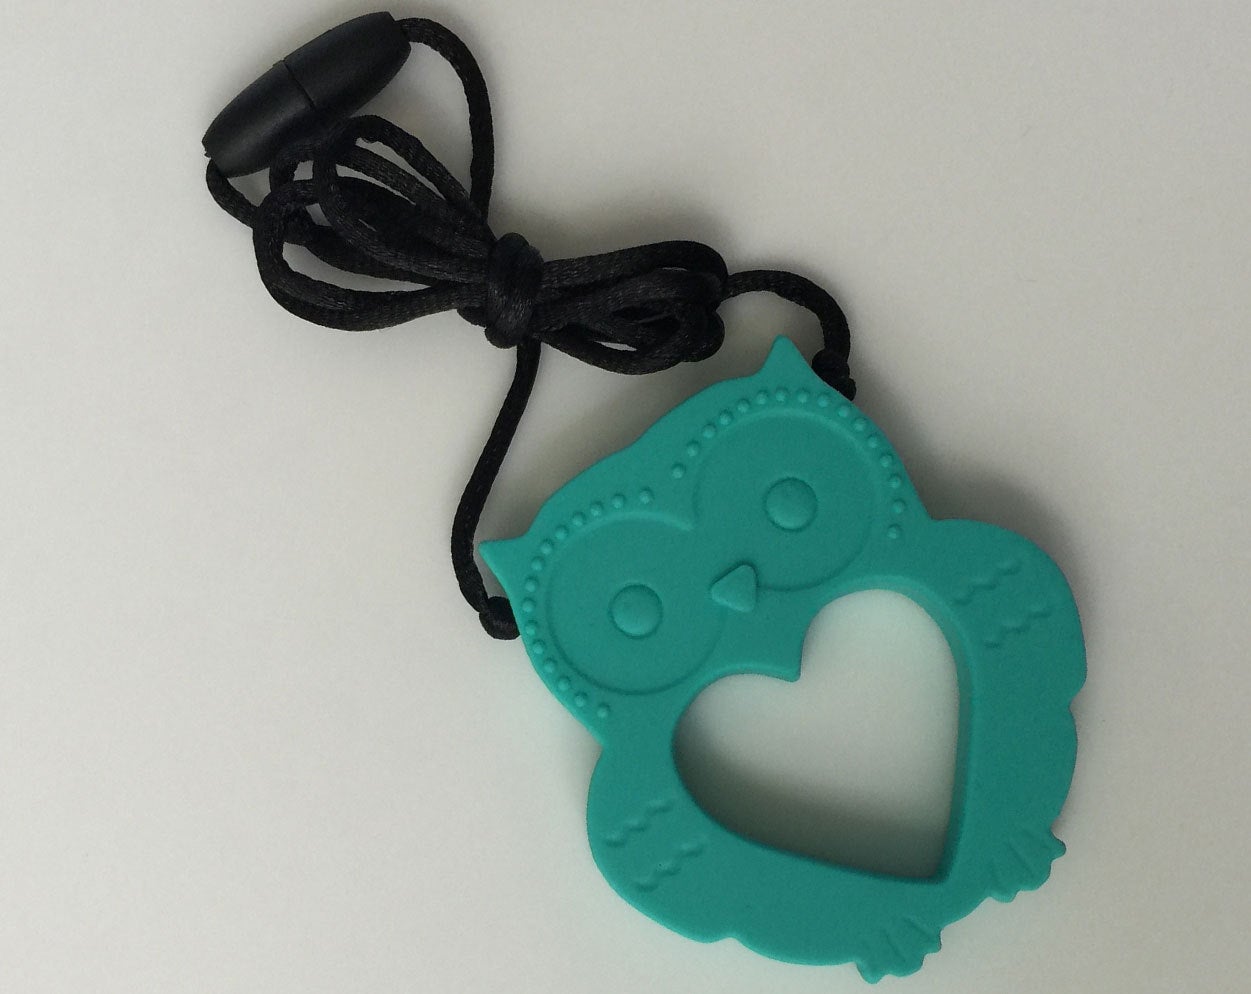 1 Silicone Owl Teether / Pendant in Teal - Silicone Teething, Silicone Teether, Teething Pendant